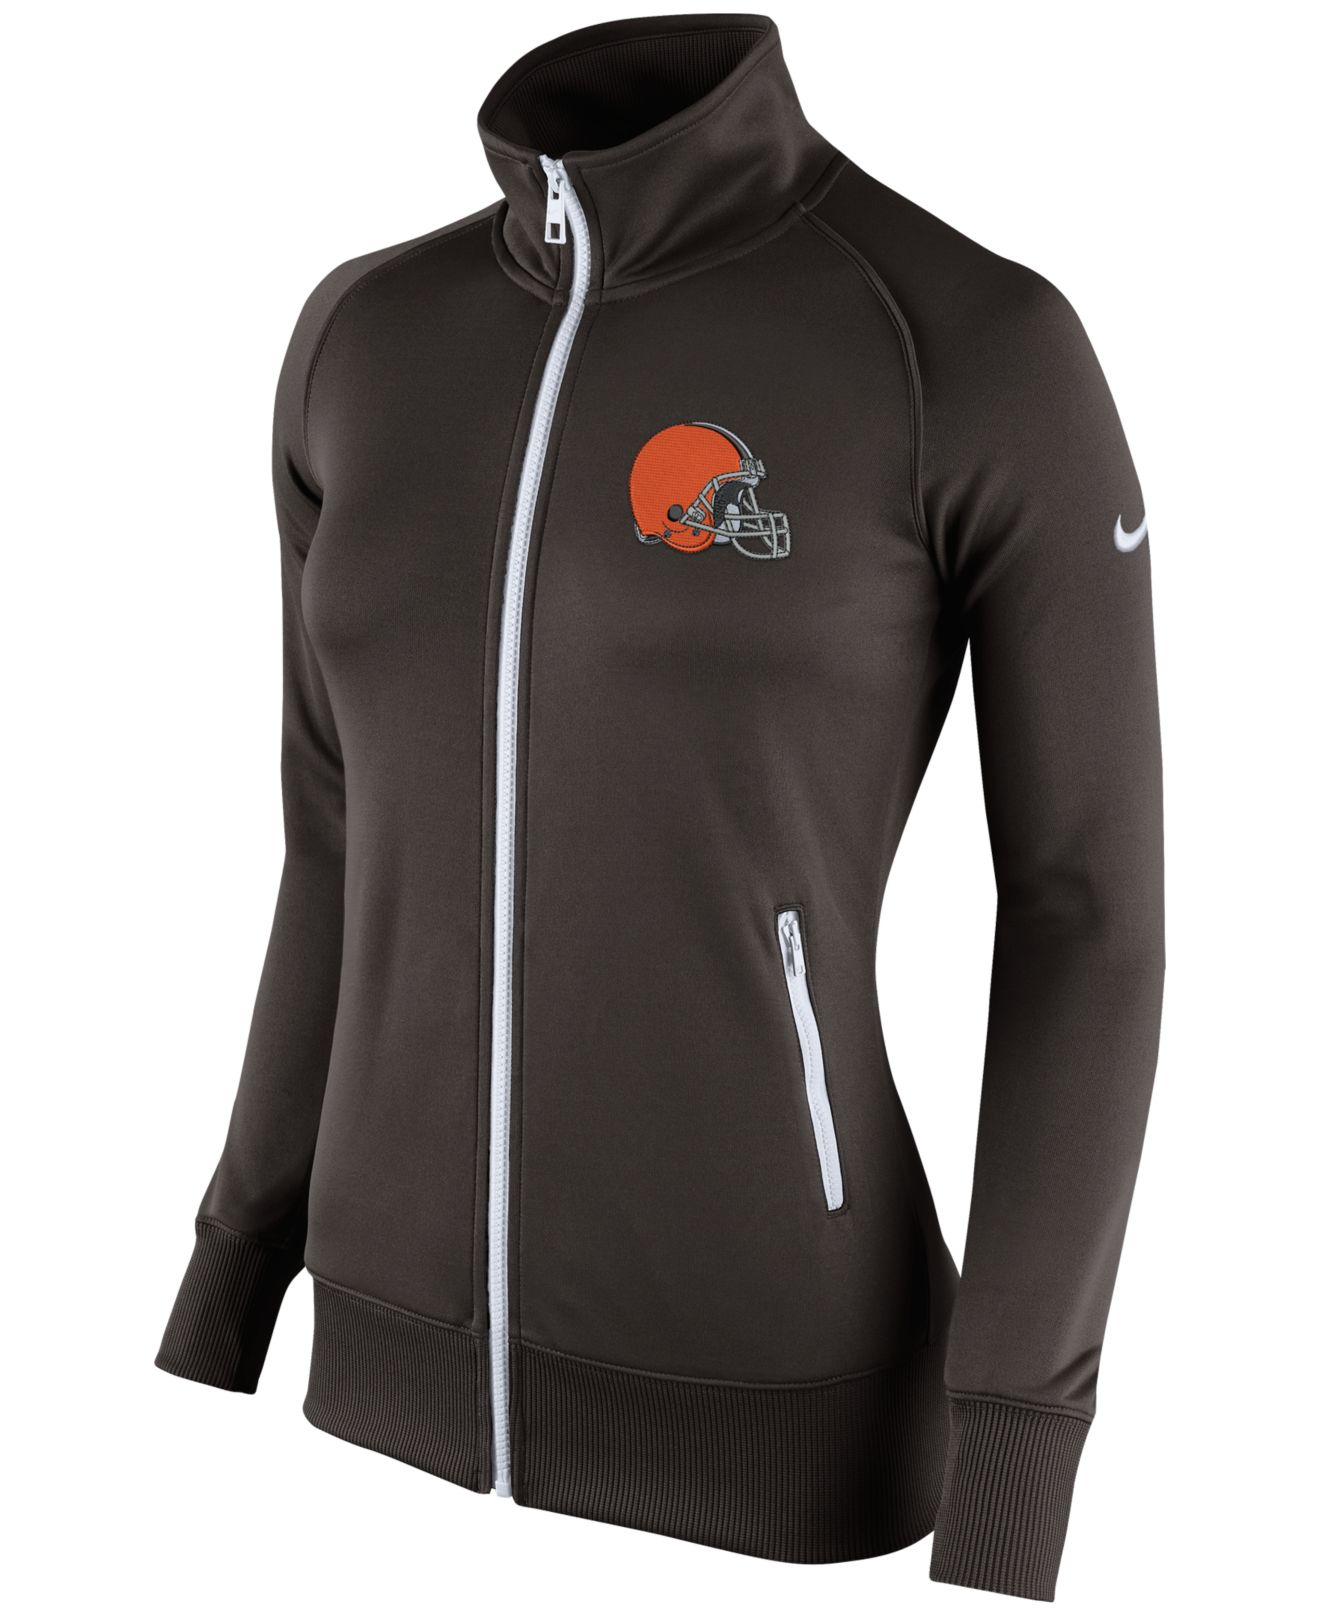 Lyst - Nike Women's Cleveland Browns Stadium Track Jacket in Brown